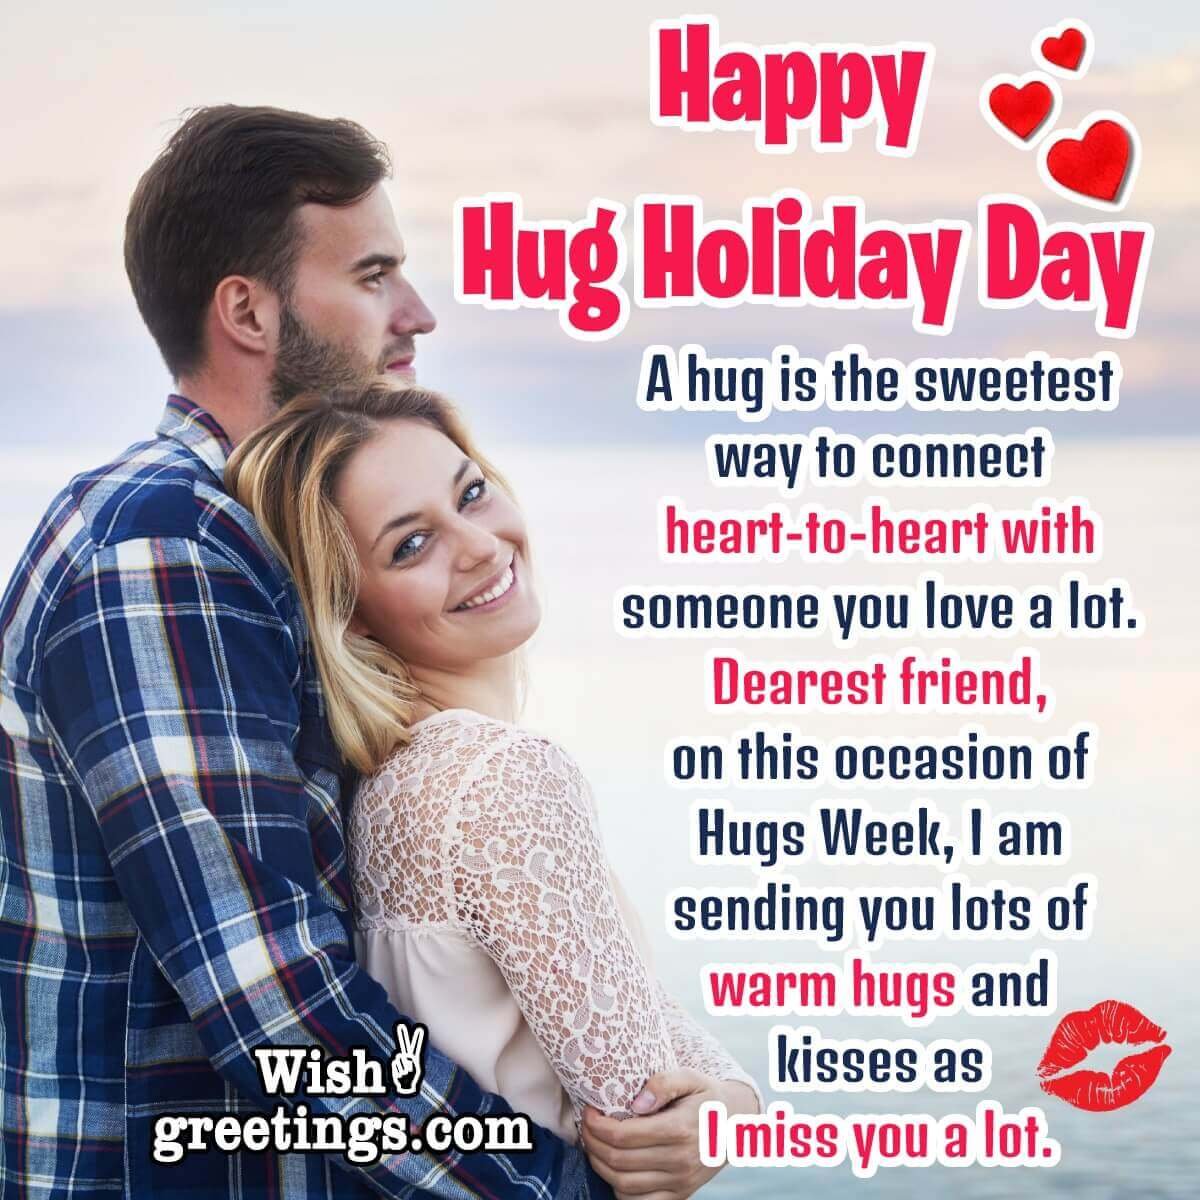 Happy Hug Holiday Day Wishes Messages